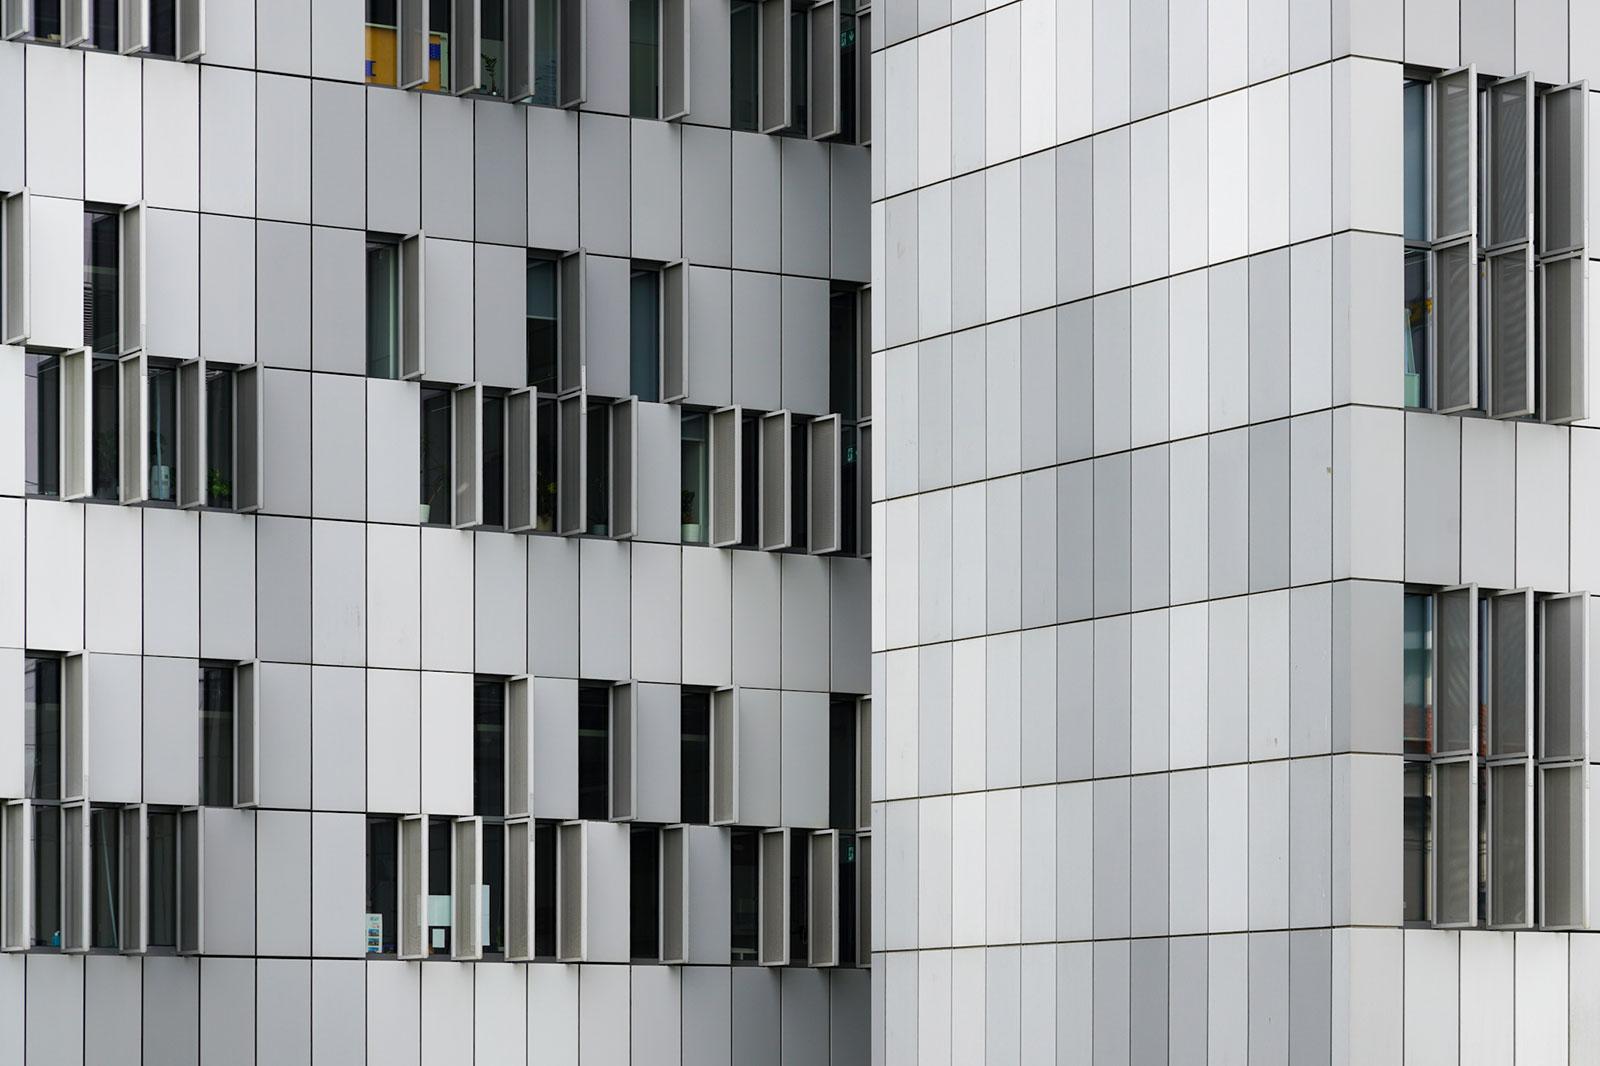 Eight Shades of Grey: The Facade of the Med Campus Graz photographed by Michael Nguyen